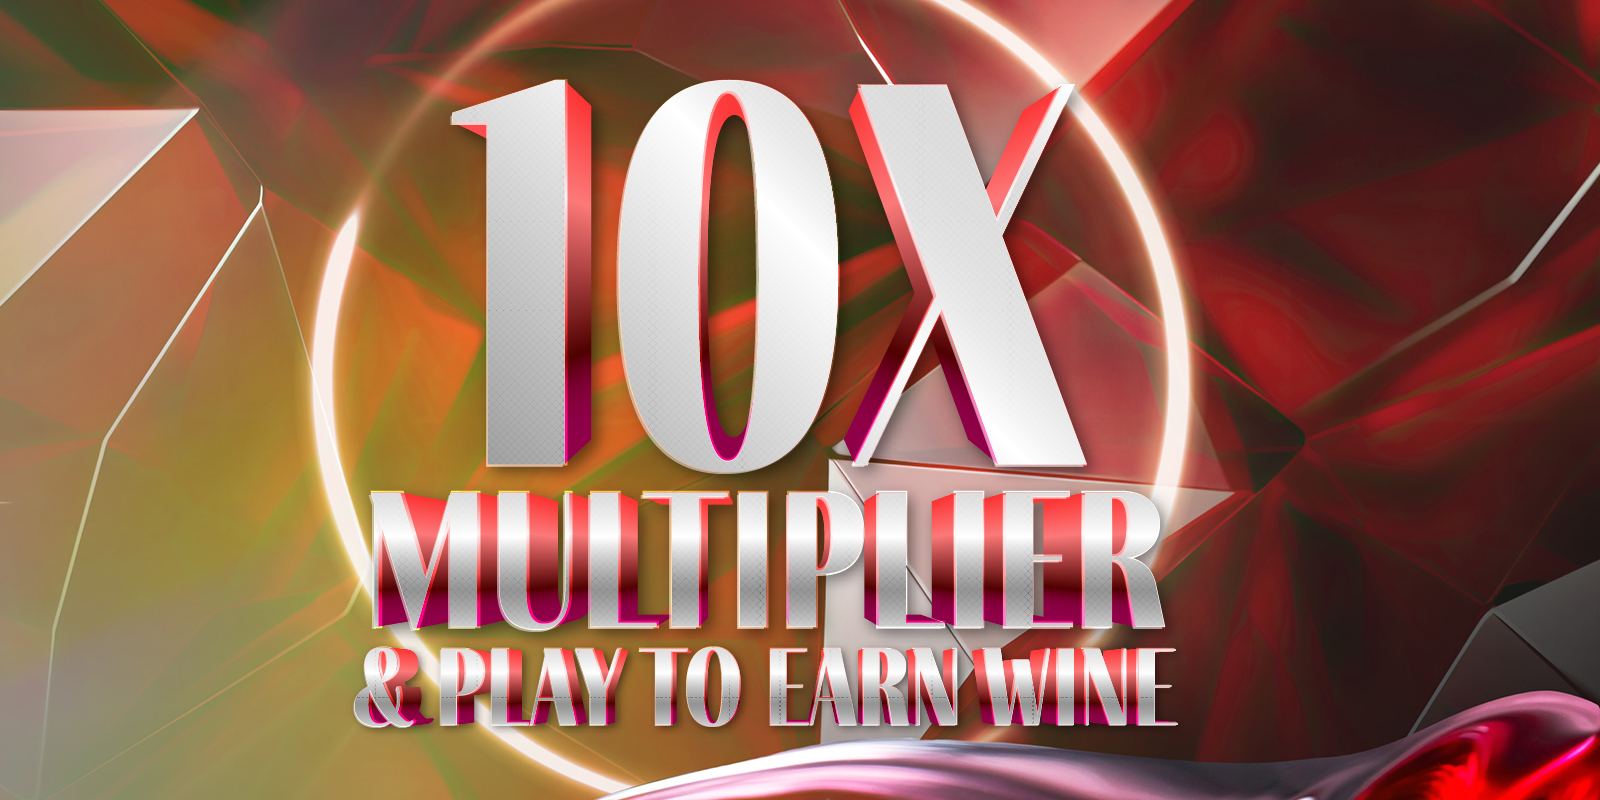 10x multiplier play to earn wine creative showing event name and geometric design